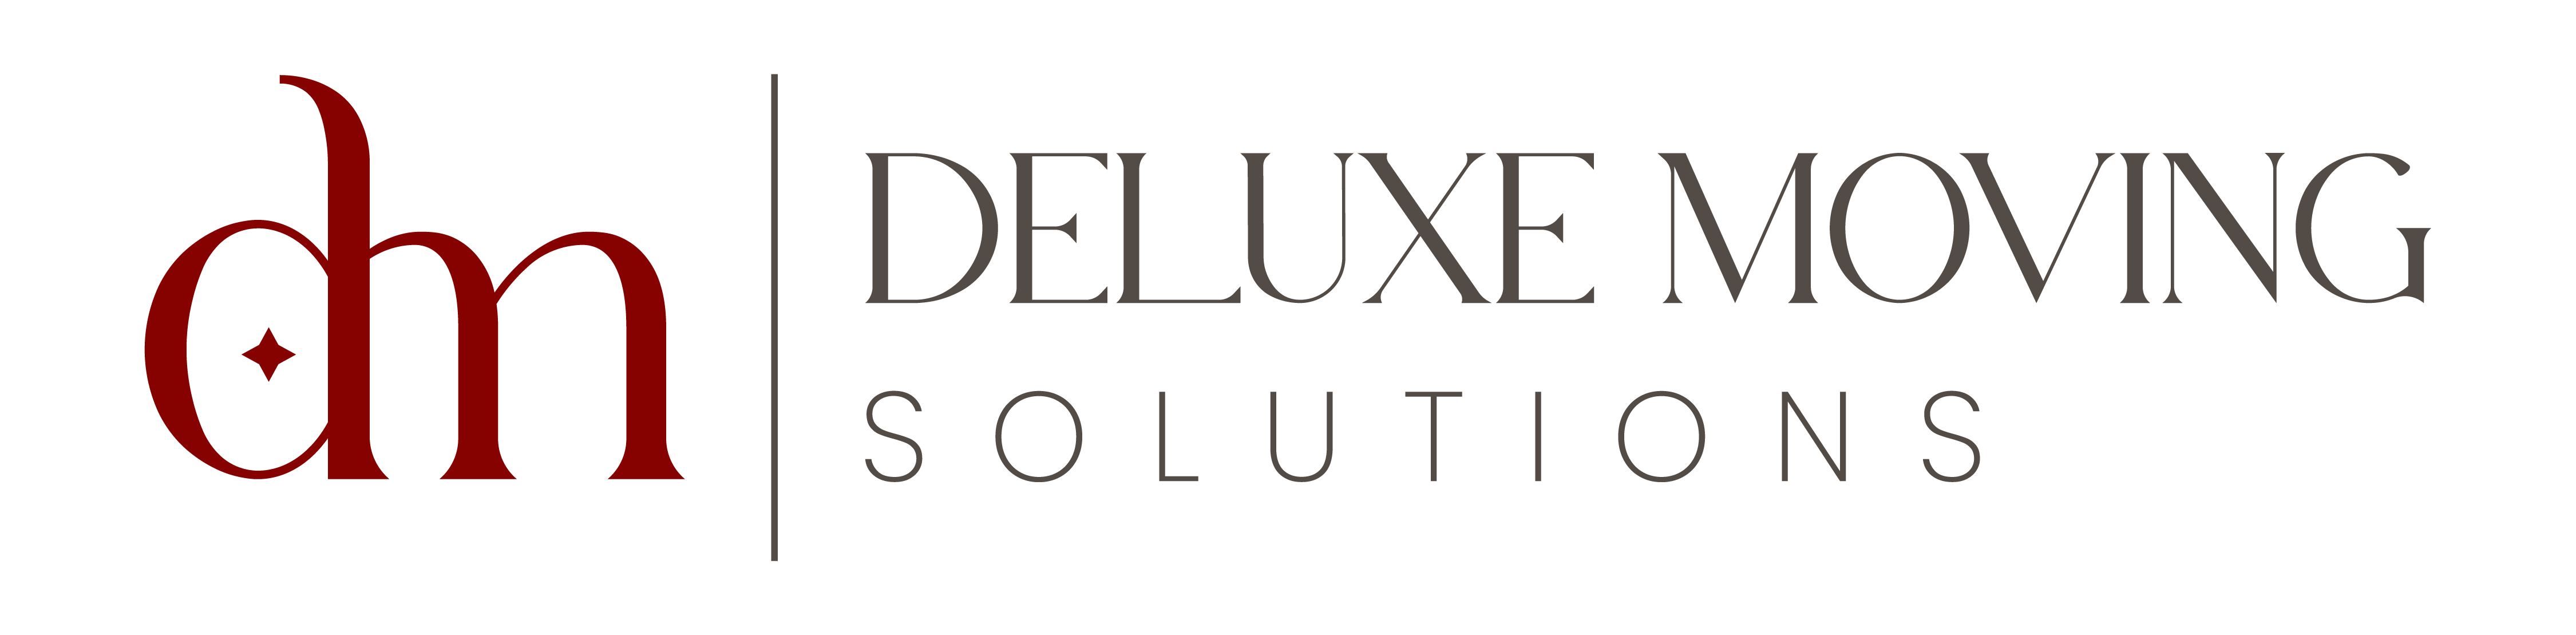 Deluxe Moving Solutions